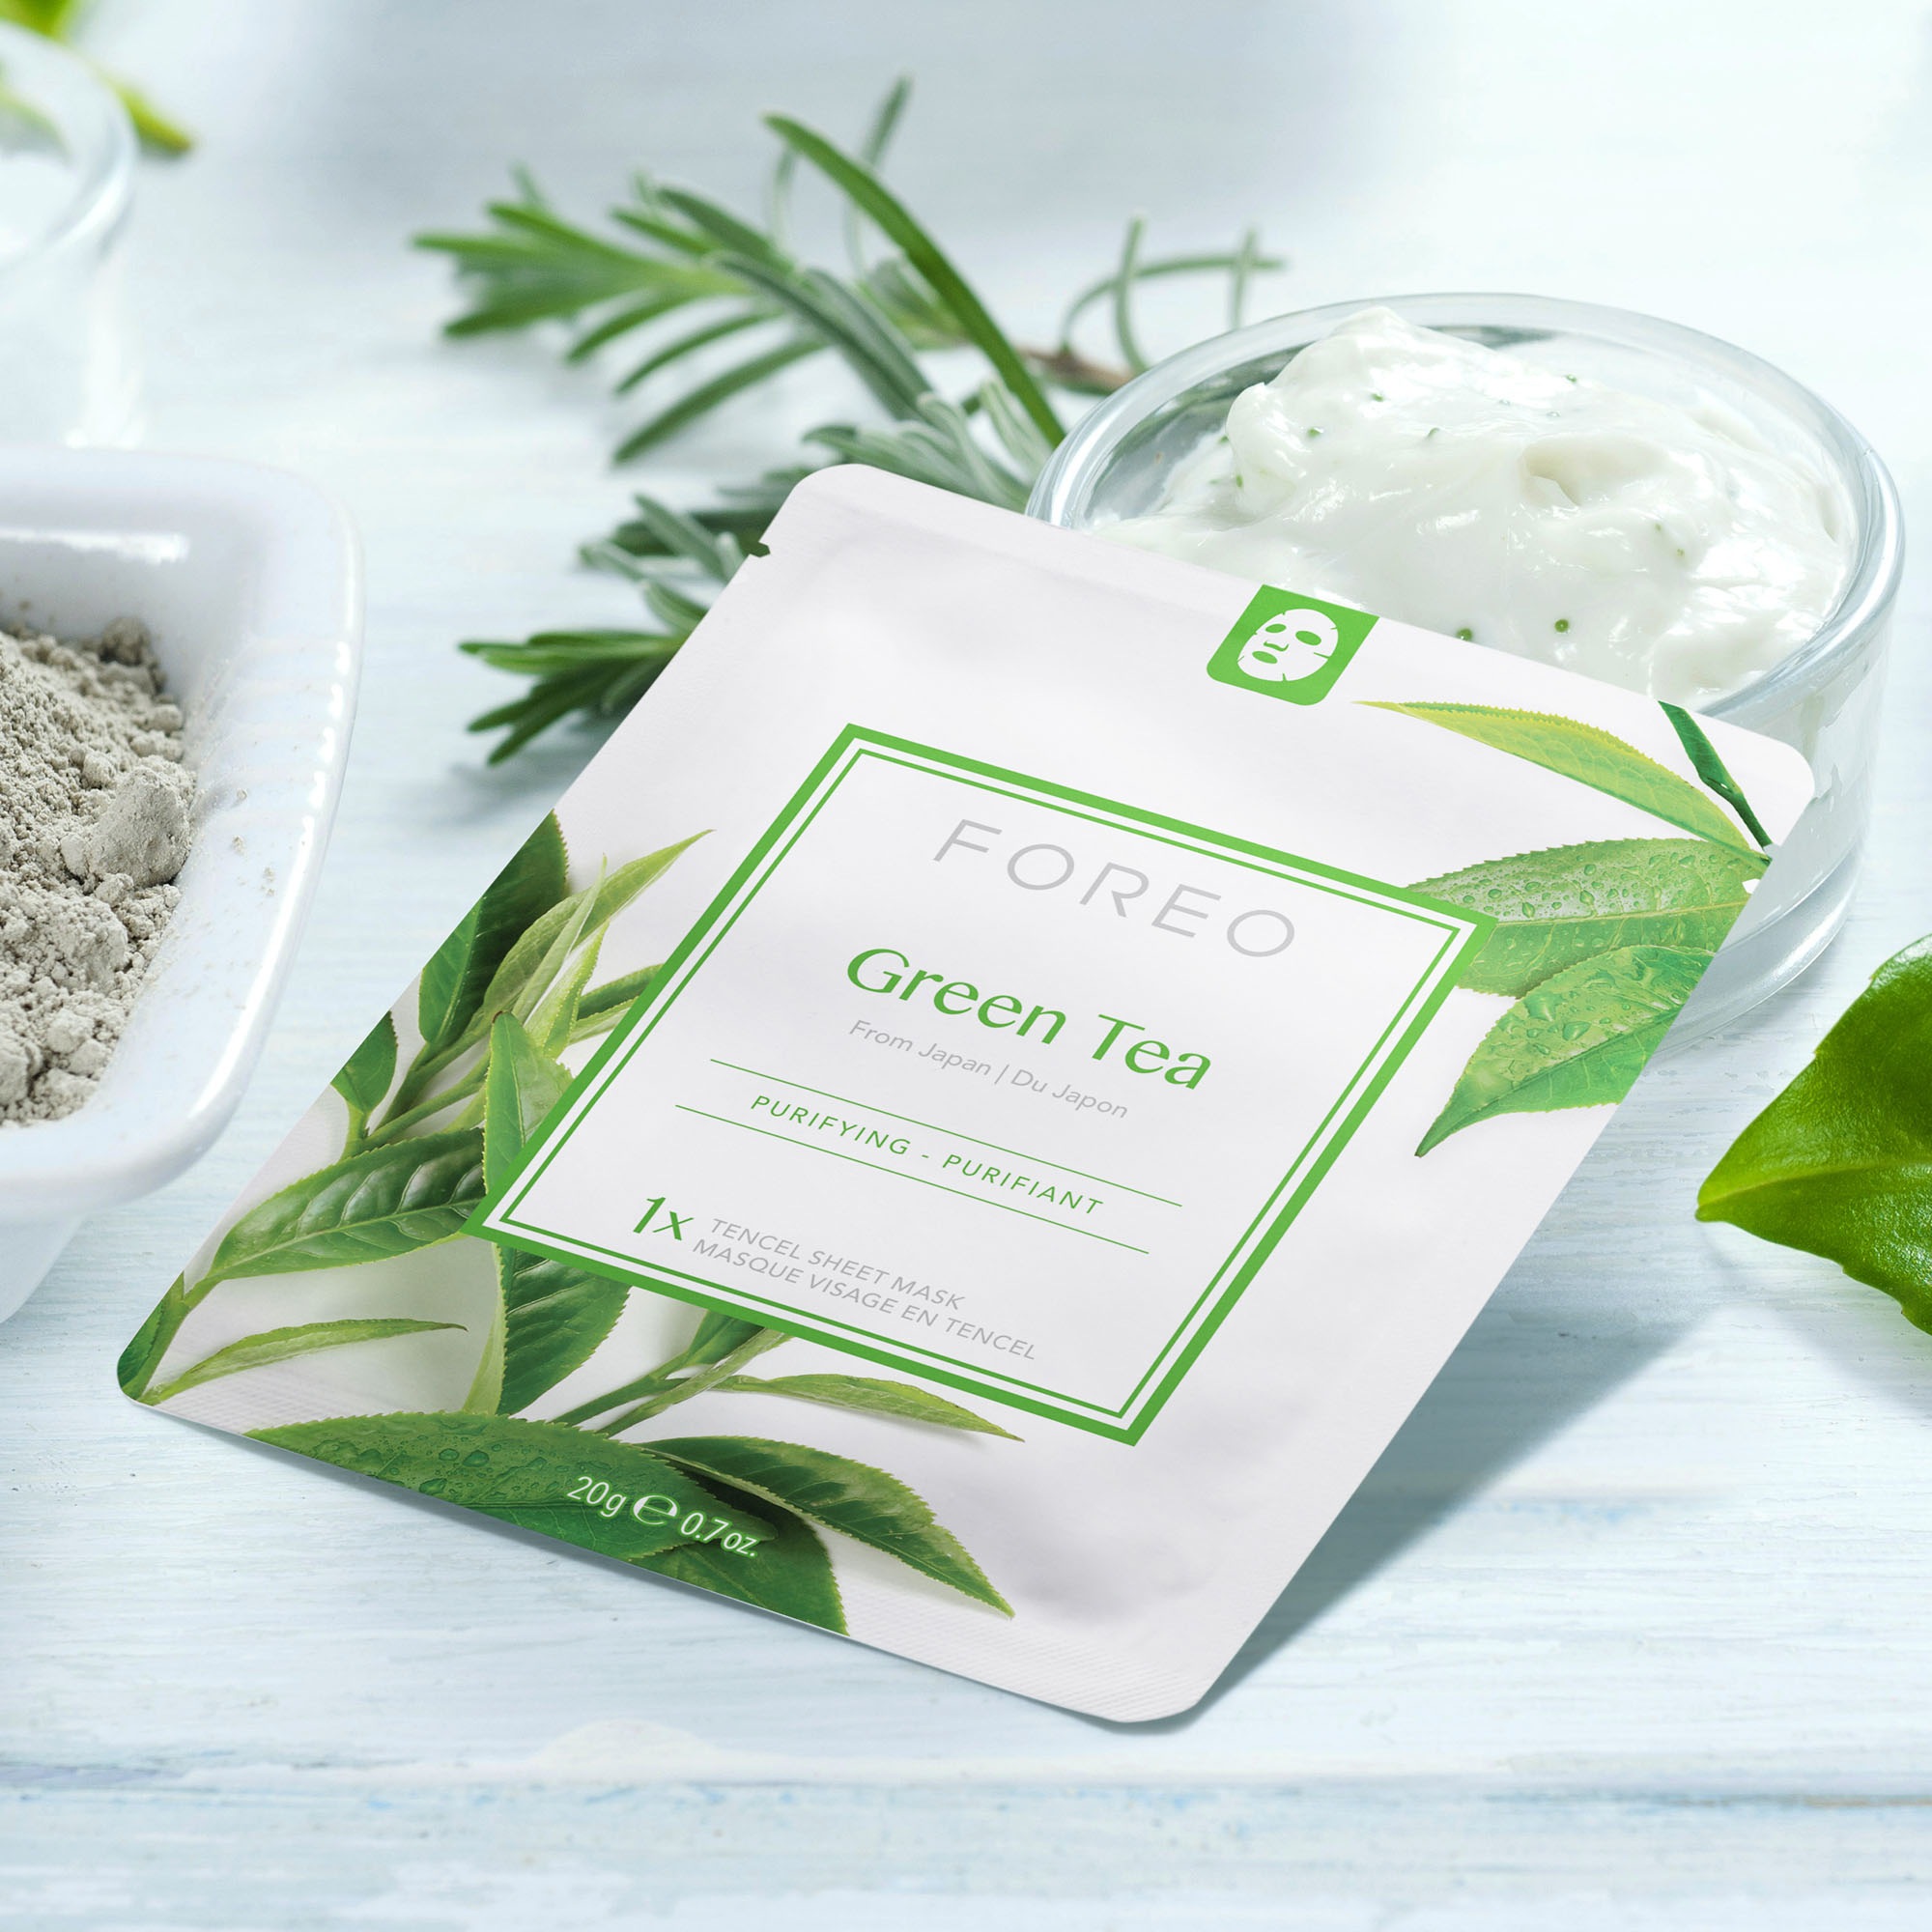 Face Green Gesichtsmaske bei To Collection FOREO OTTOversand »Farm Sheet Masks Tea«